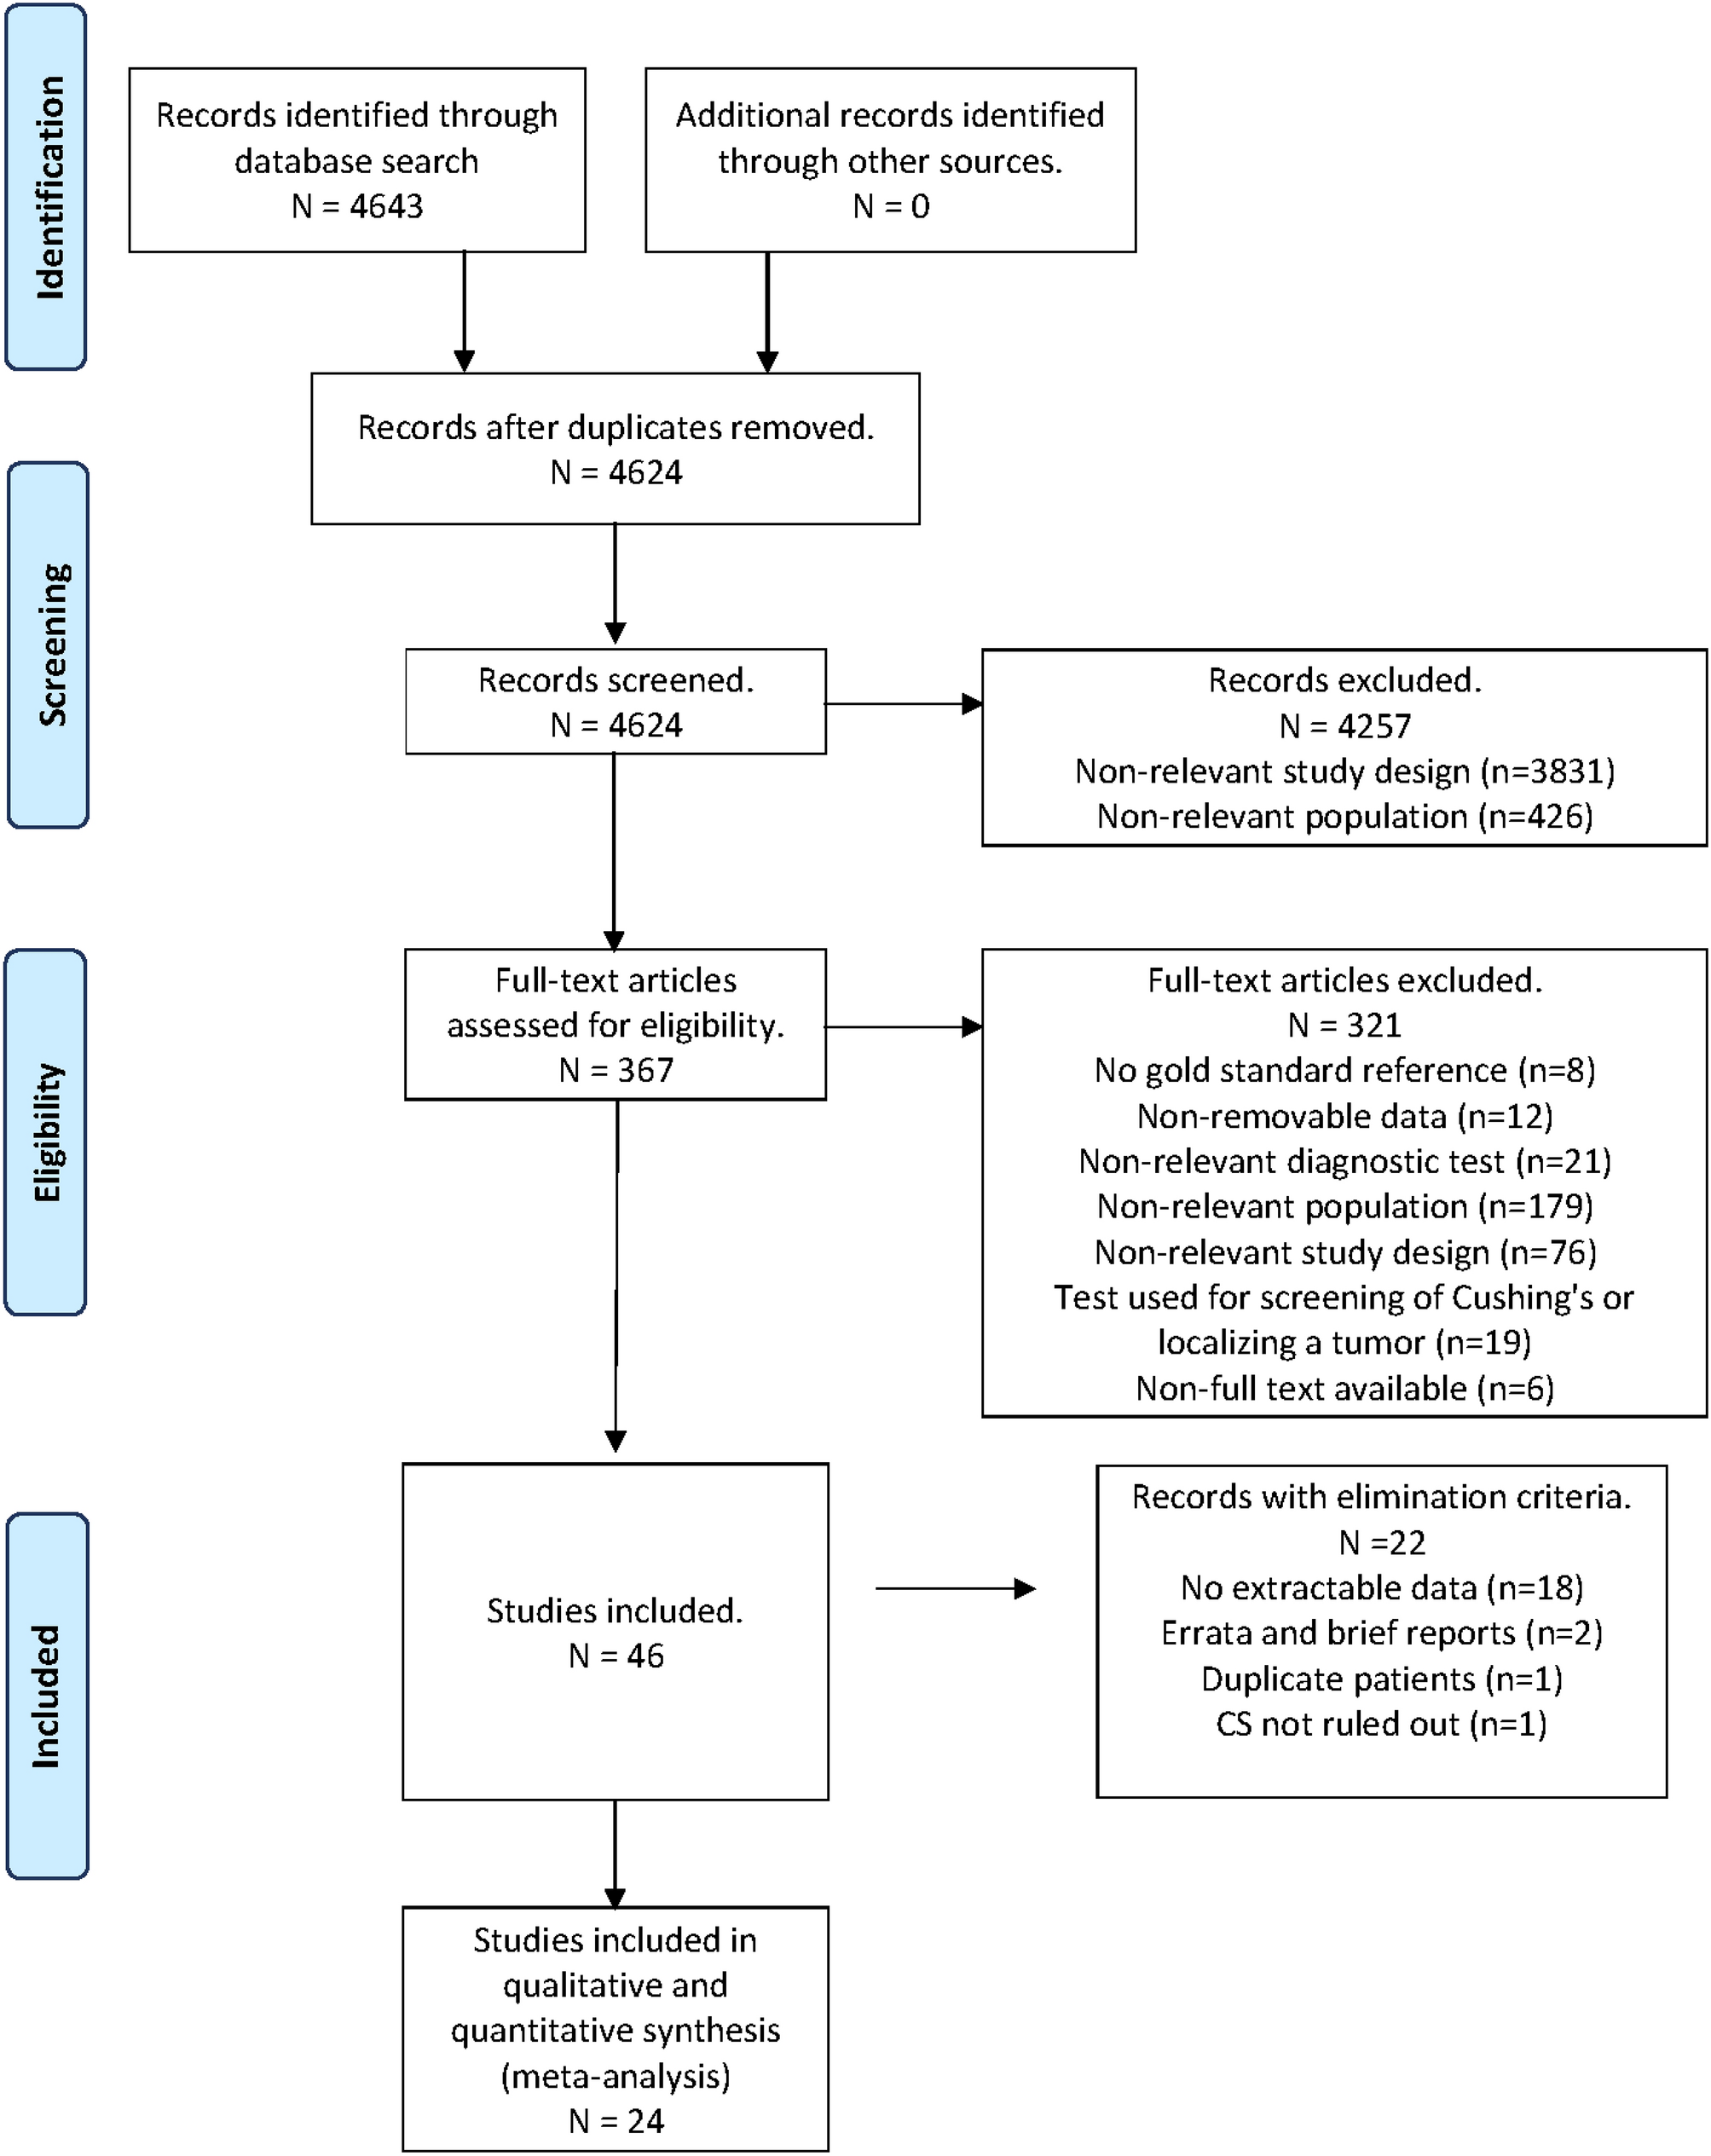 The conundrum of differentiating Cushing’s syndrome from non-neoplastic hypercortisolism: a systematic review and meta-analysis